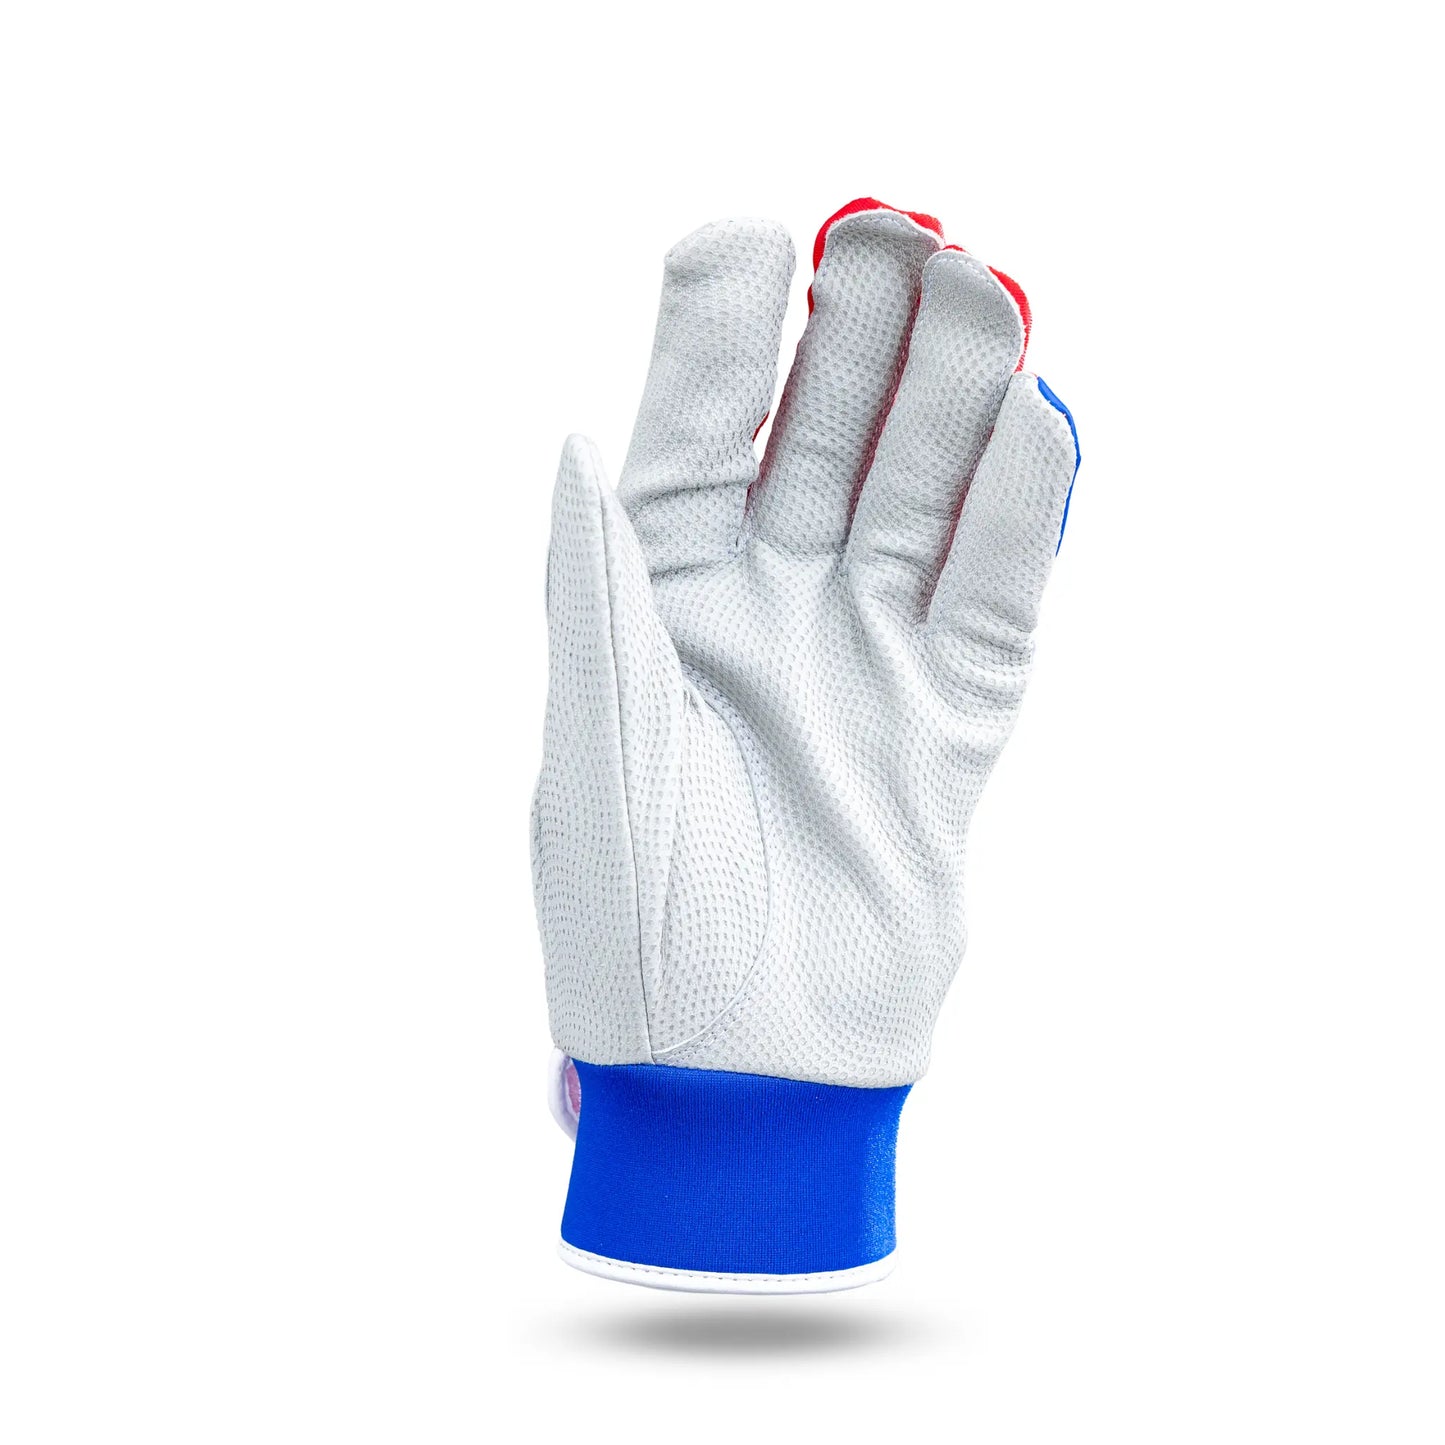 Palm view of Tater Baseball's high-performance batting gloves, featuring durable white mesh for breathability, with red stitched accents and a blue neoprene wrist cuff for secure fit and comfort, against a clean white background.